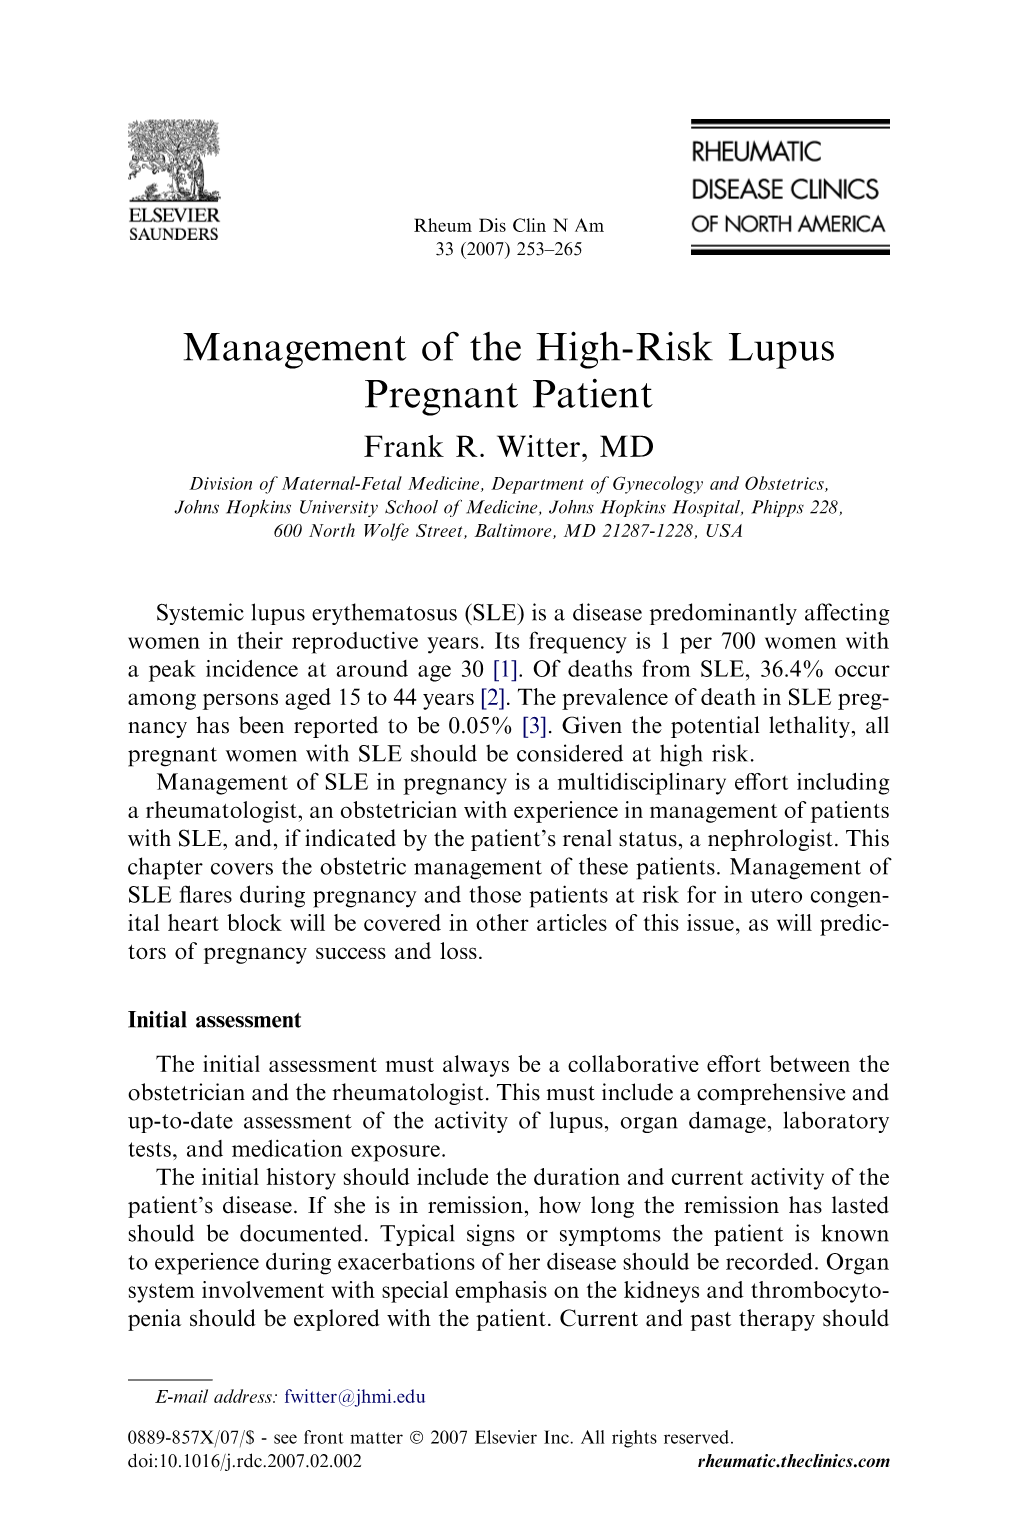 Management of the High-Risk Lupus Pregnant Patient Frank R